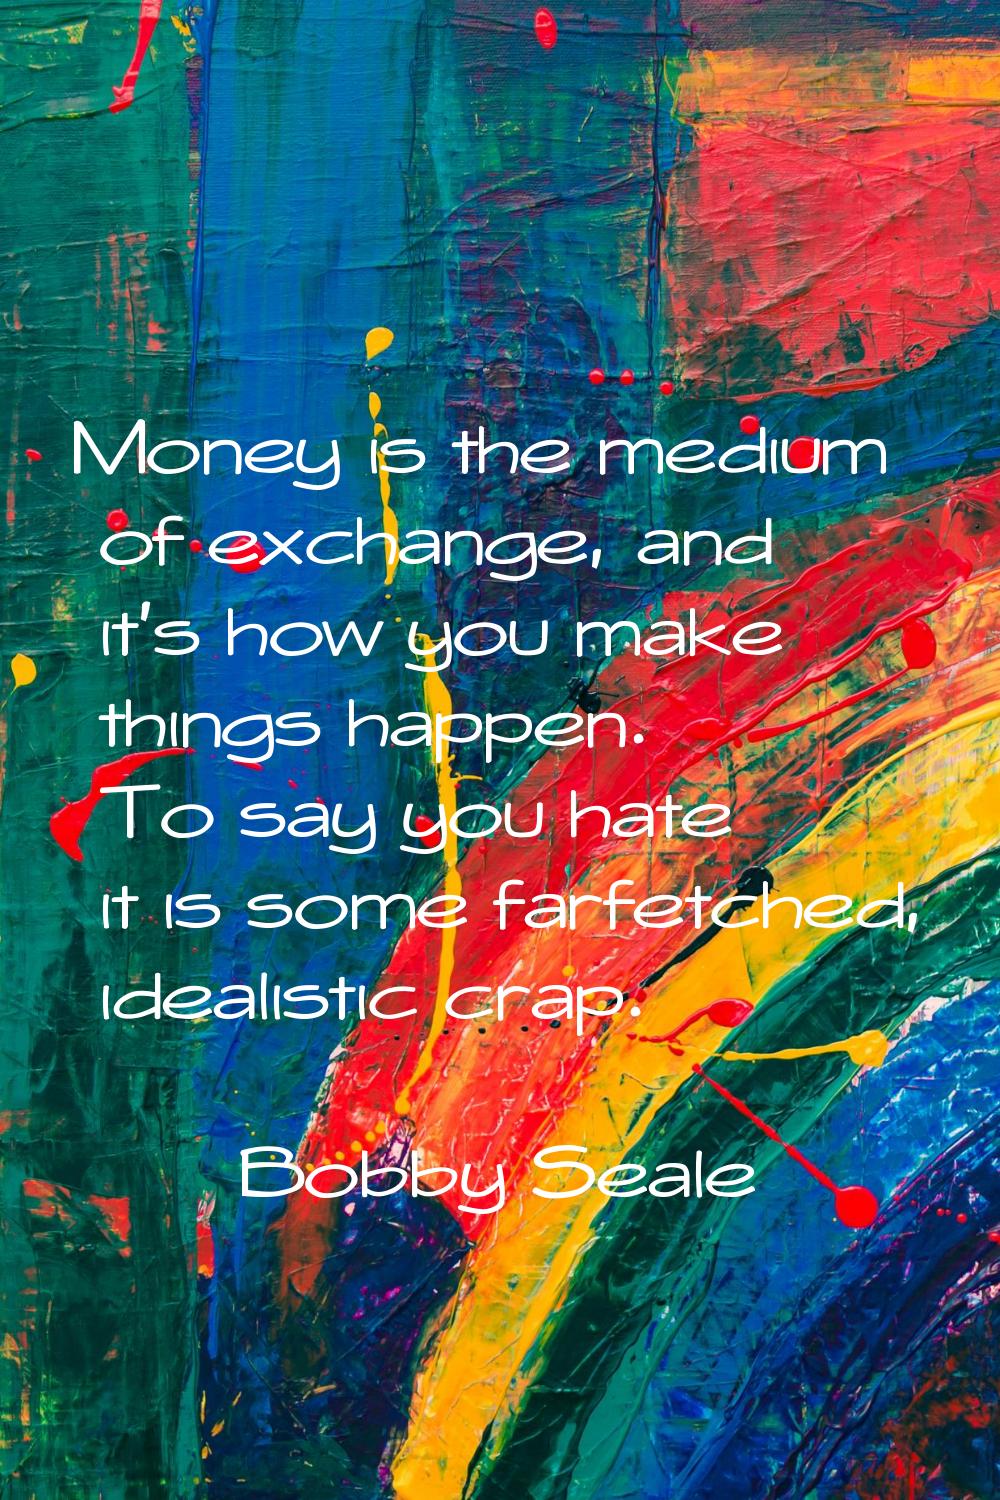 Money is the medium of exchange, and it's how you make things happen. To say you hate it is some fa